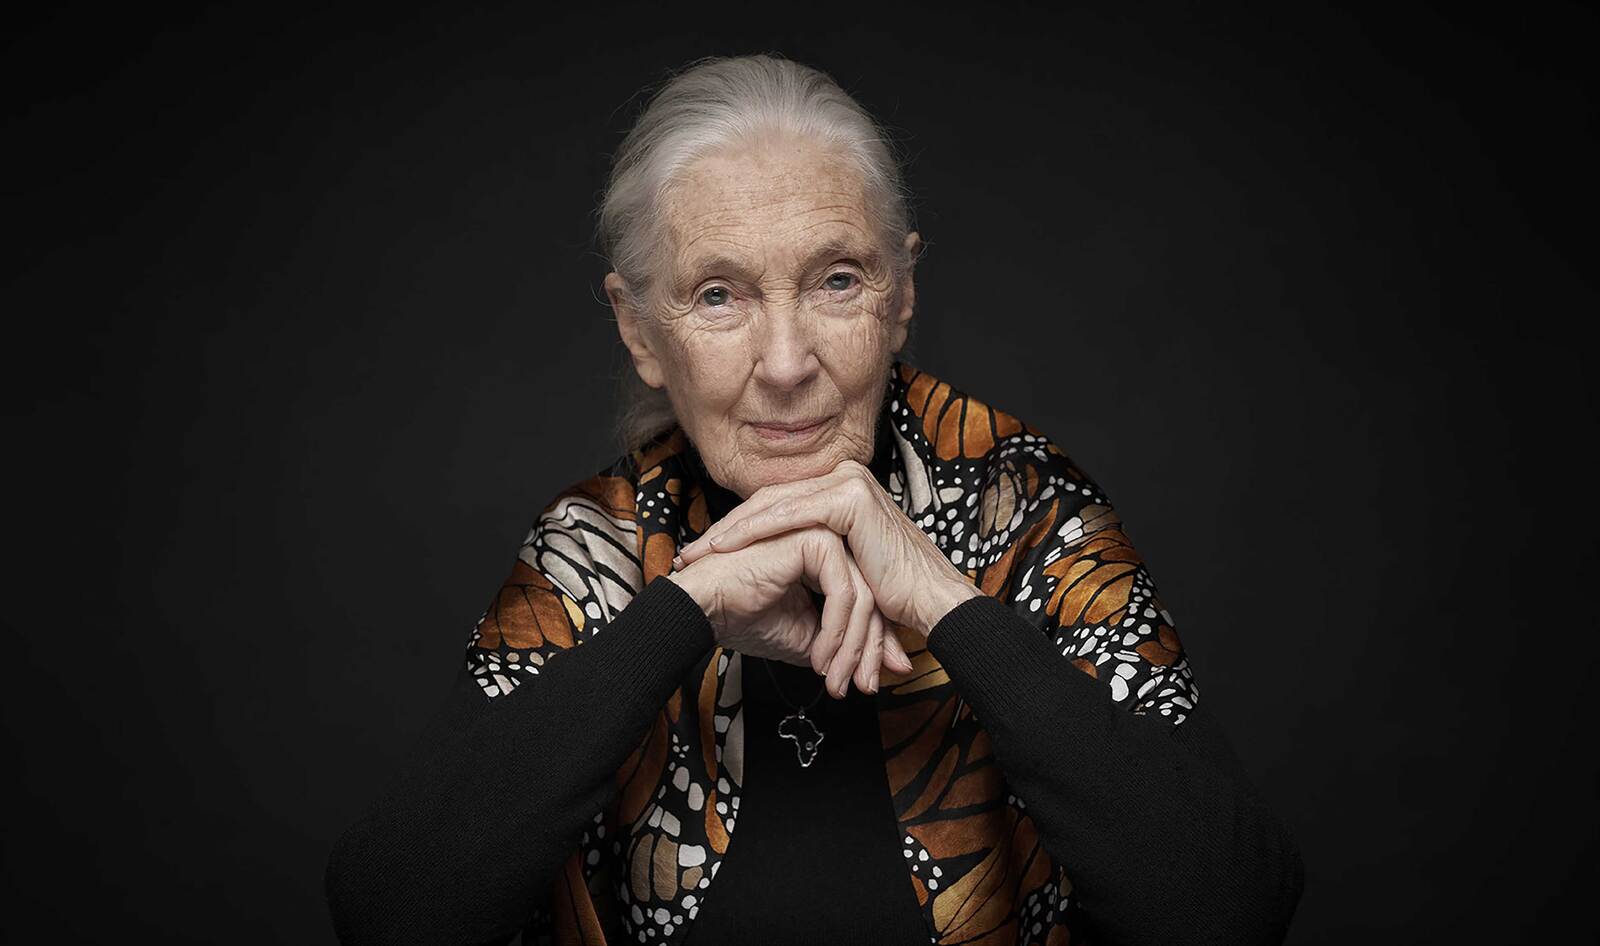 Jane Goodall on Climate Crisis: “If We Would Just Stop Eating All of This Meat, the Difference Would Be Huge”&nbsp;